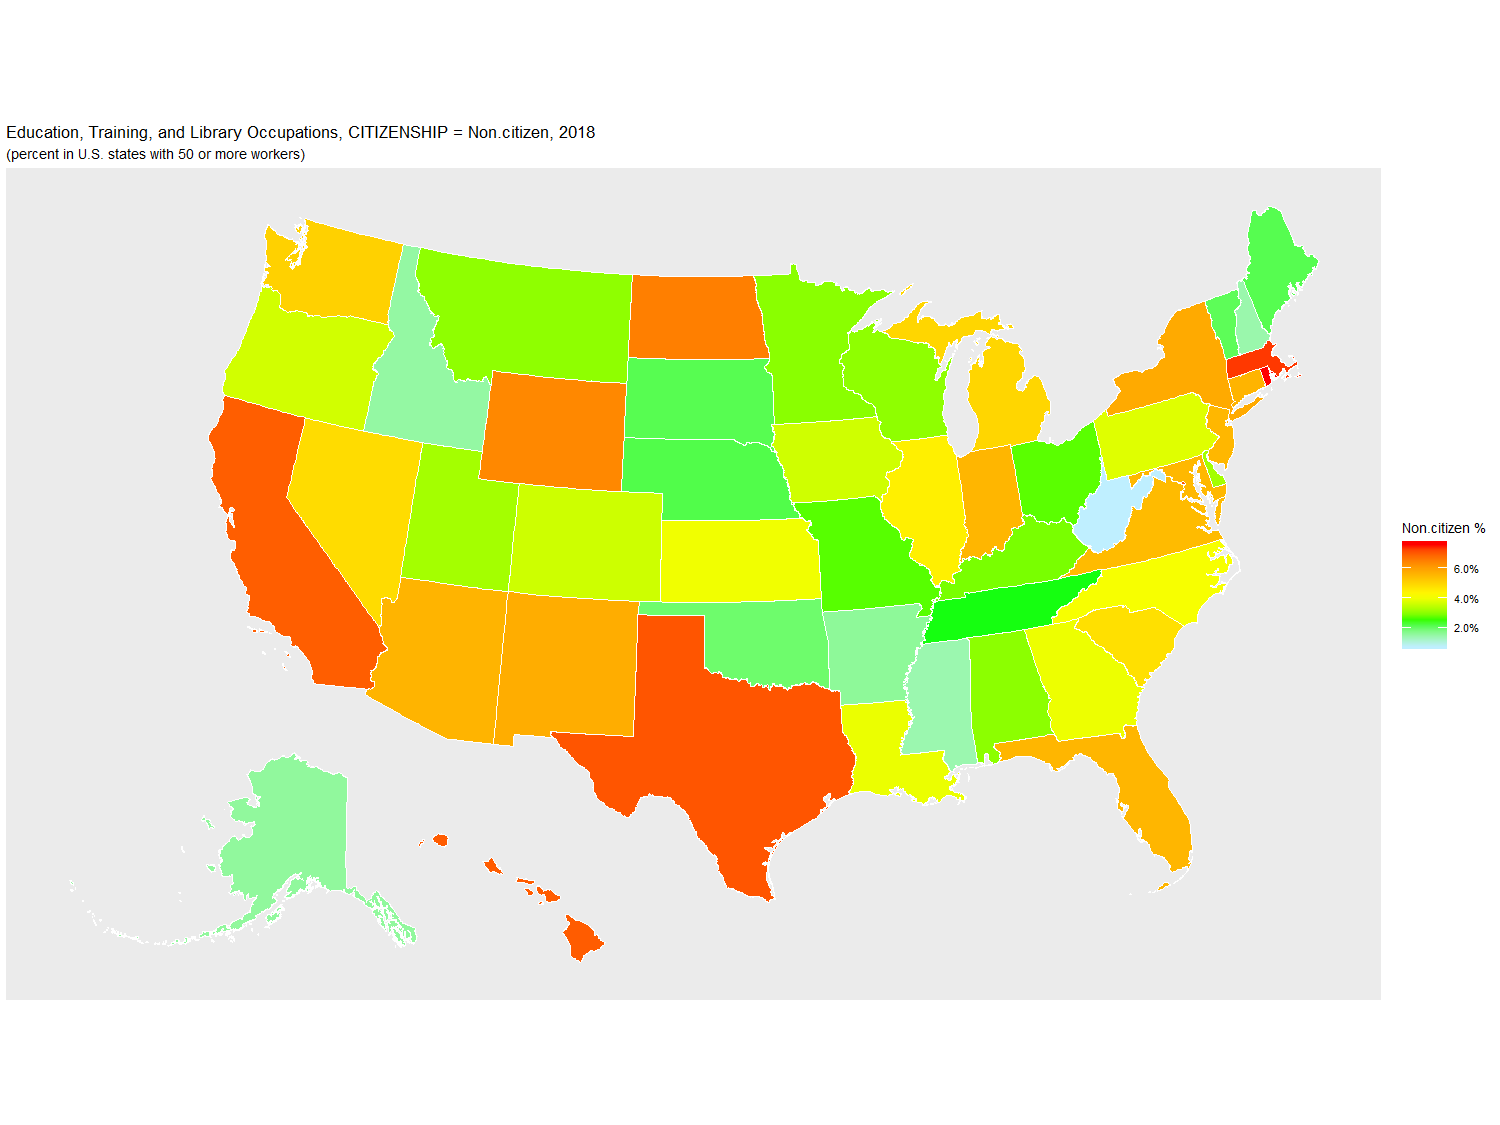 Non-citizen Percentage of Education, Training, and Library Occupations by U.S. State, 2018